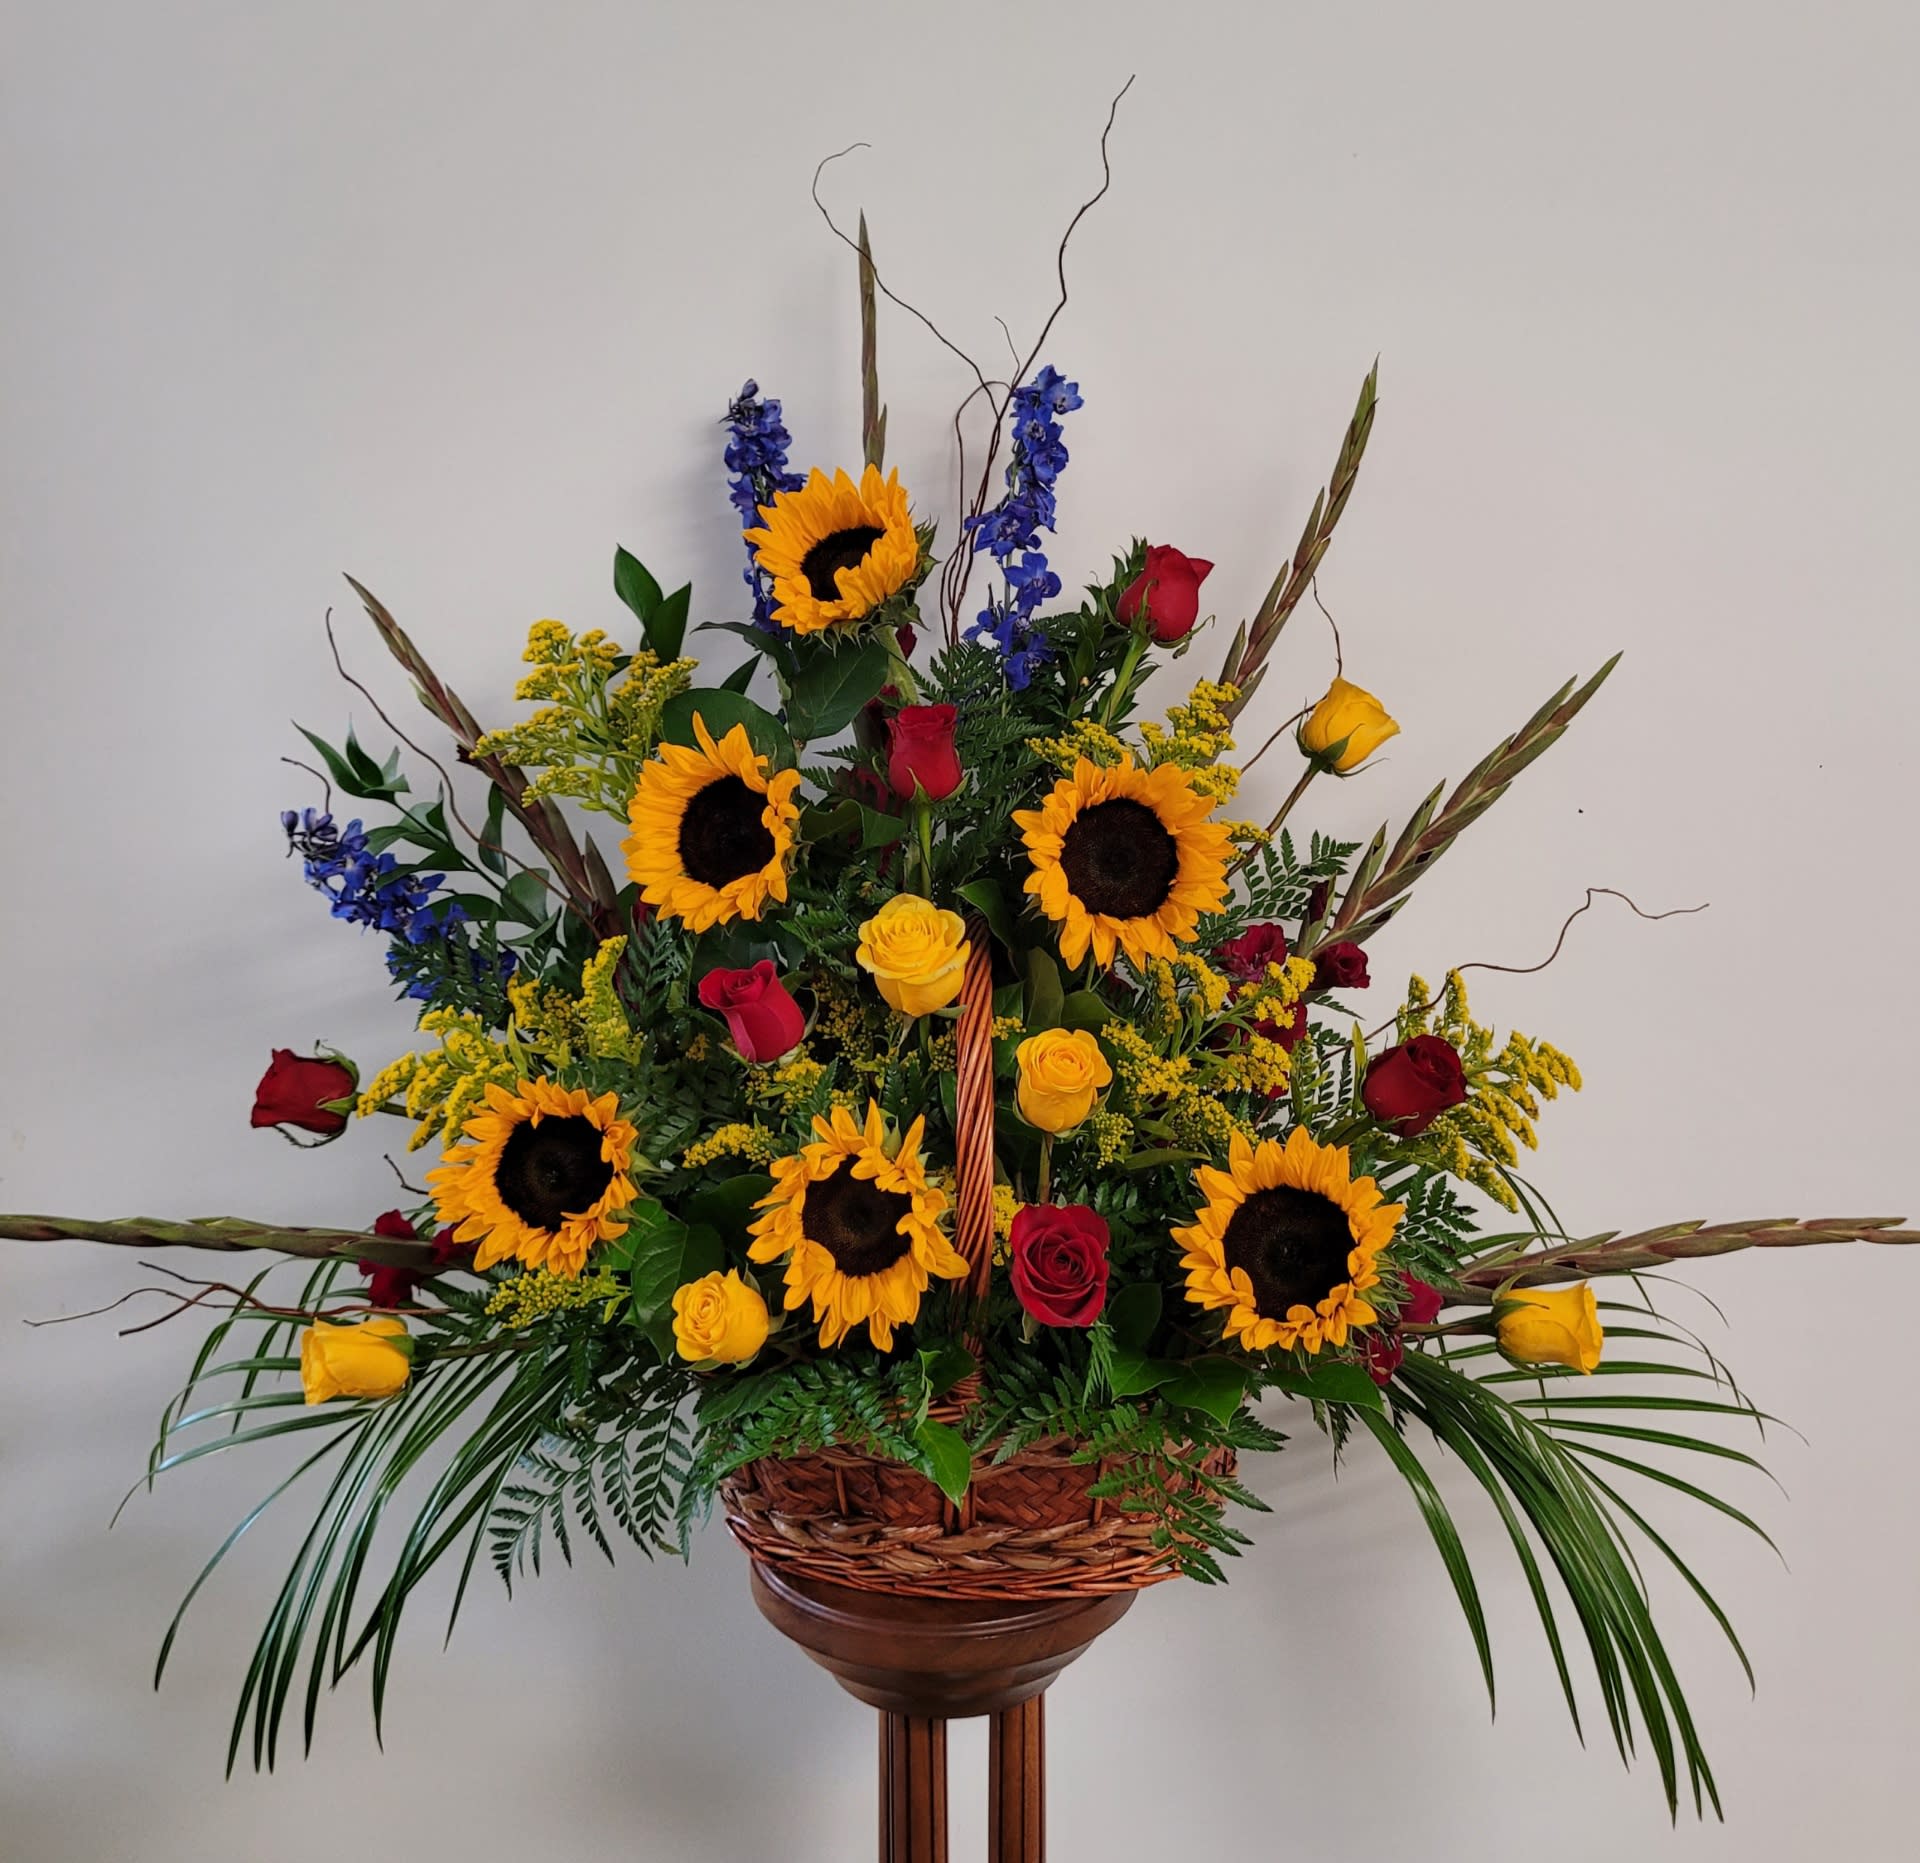 Countryside Funeral Basket - Flowers such as sunflowers, gladiolus, delphinium, and roses in a wicker basket remind us of a country garden. Flowers may vary, due to availability.